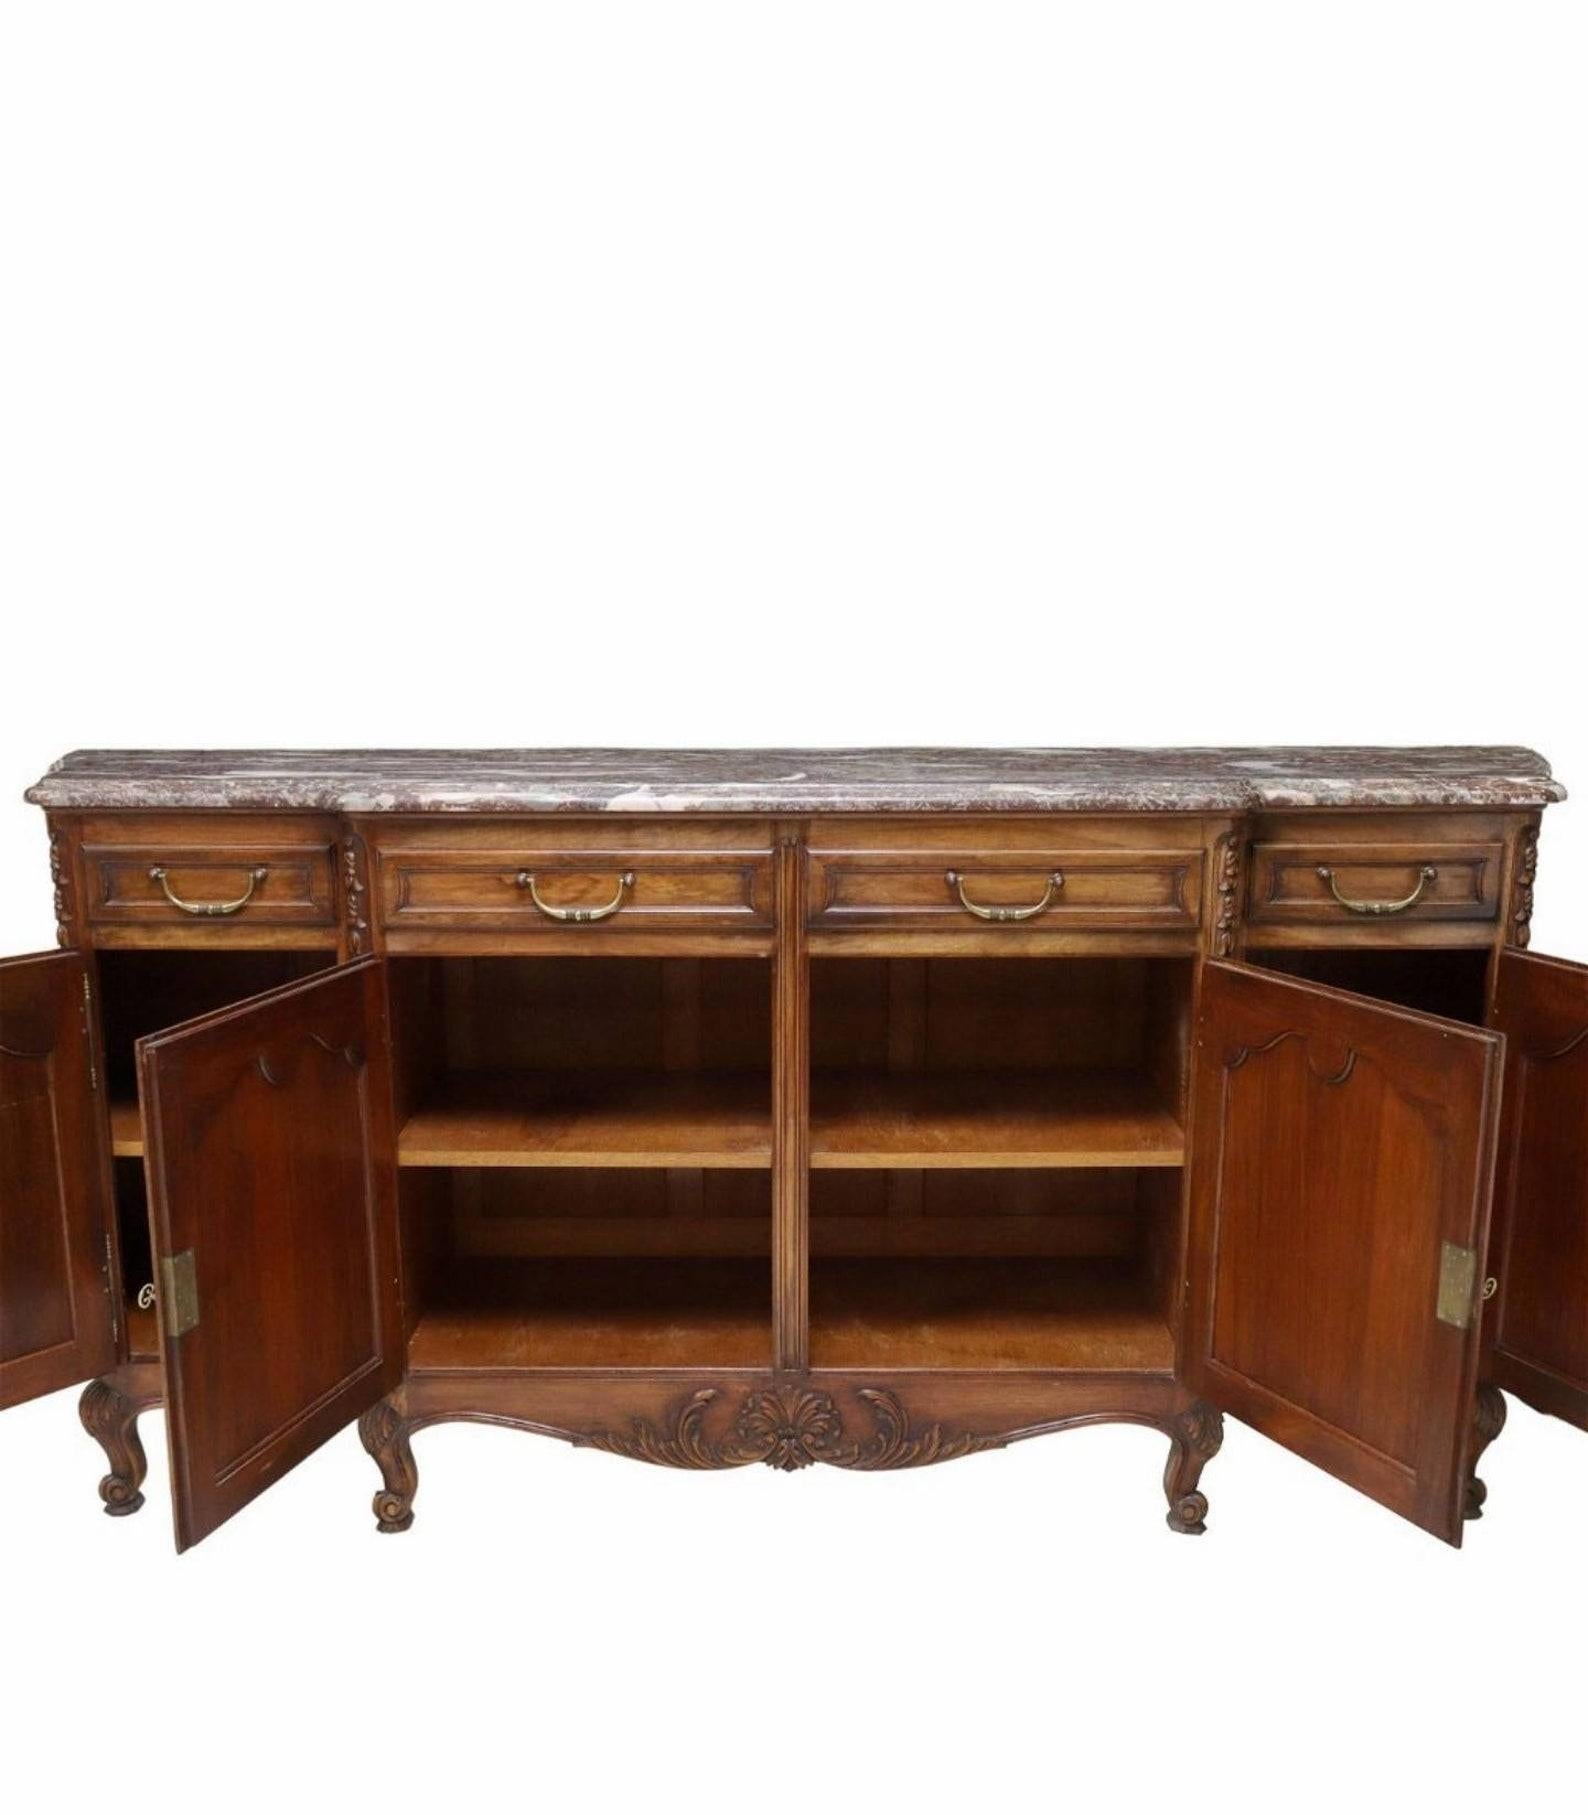 French Provincial Louis XV Grand Regence Style Breakfront Sideboard In Good Condition For Sale In Forney, TX